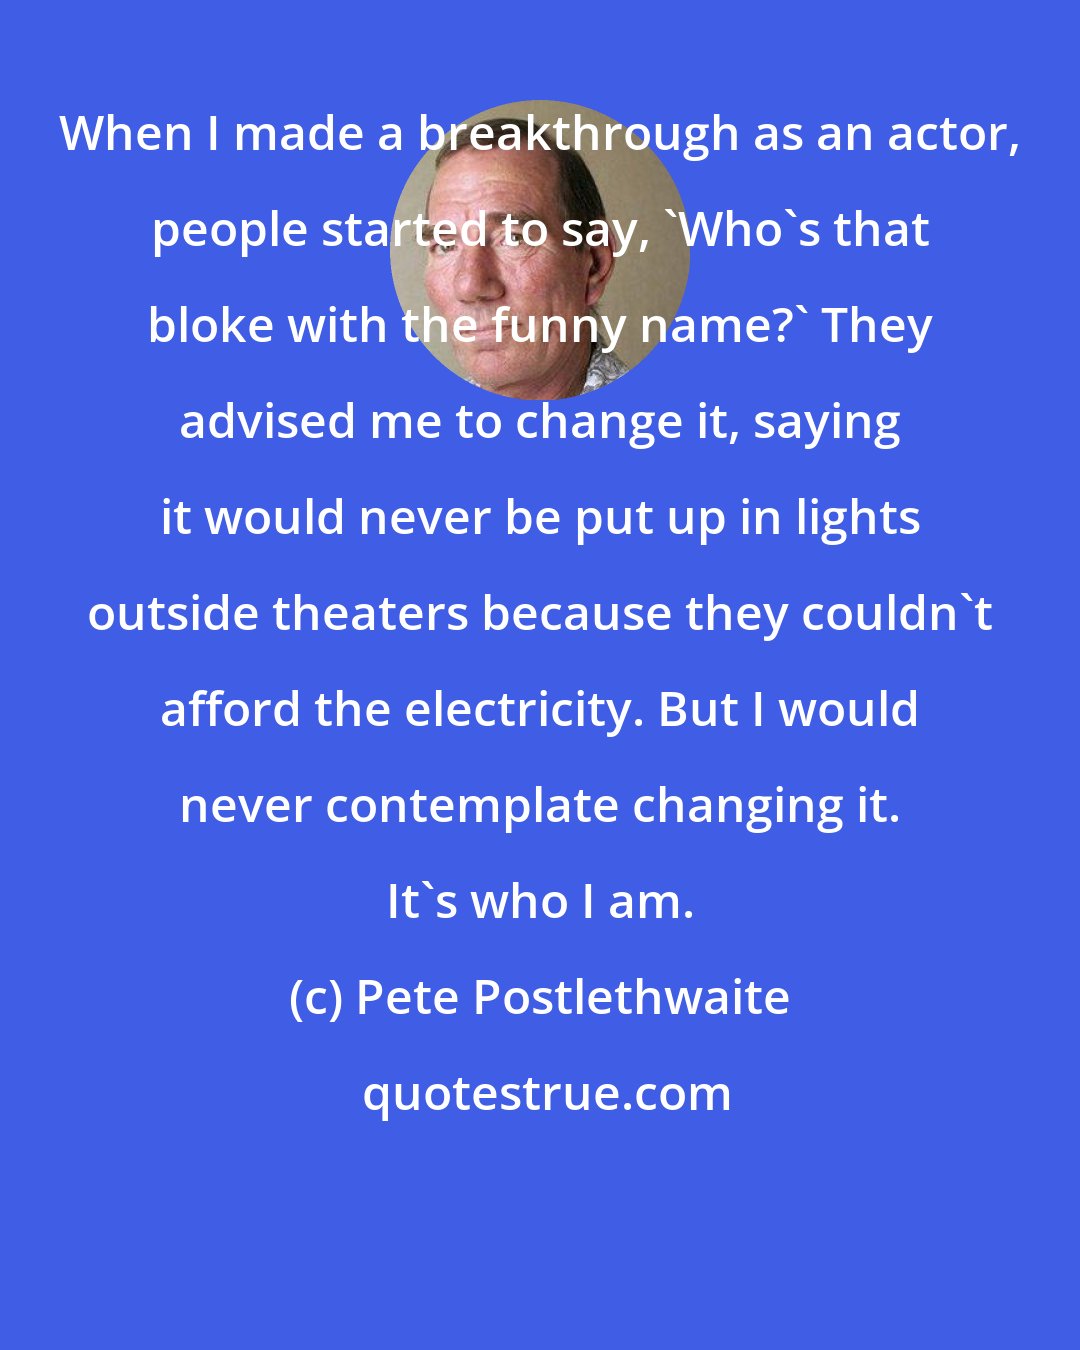 Pete Postlethwaite: When I made a breakthrough as an actor, people started to say, 'Who's that bloke with the funny name?' They advised me to change it, saying it would never be put up in lights outside theaters because they couldn't afford the electricity. But I would never contemplate changing it. It's who I am.